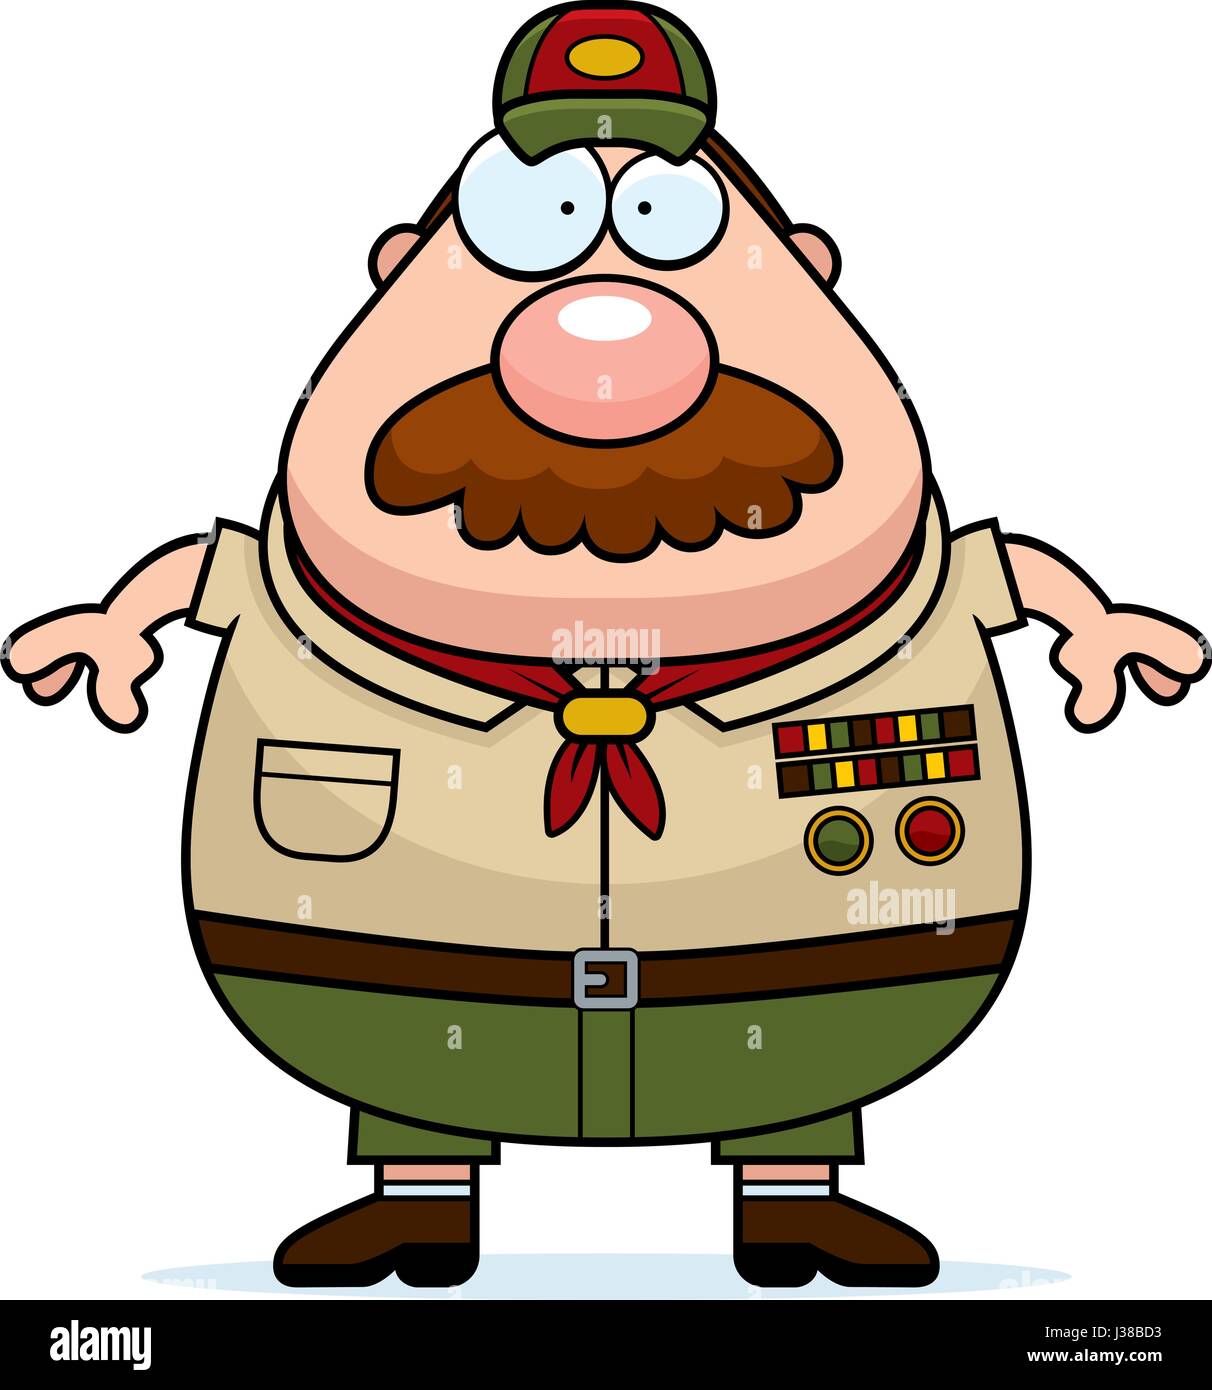 A cartoon illustration of a scoutmaster with a mustache. Stock Vector